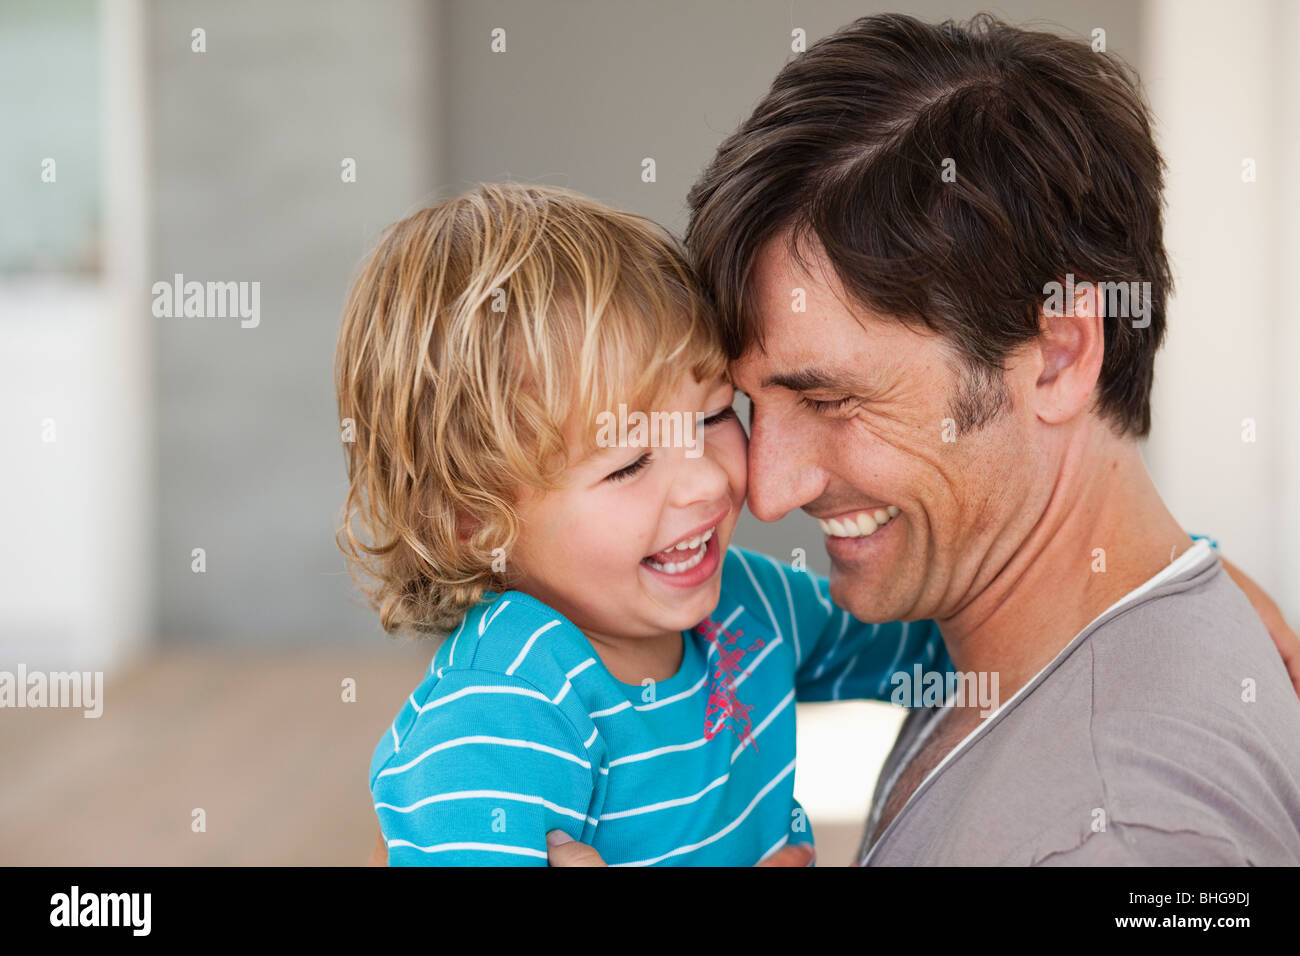 father tickling son Stock Photo